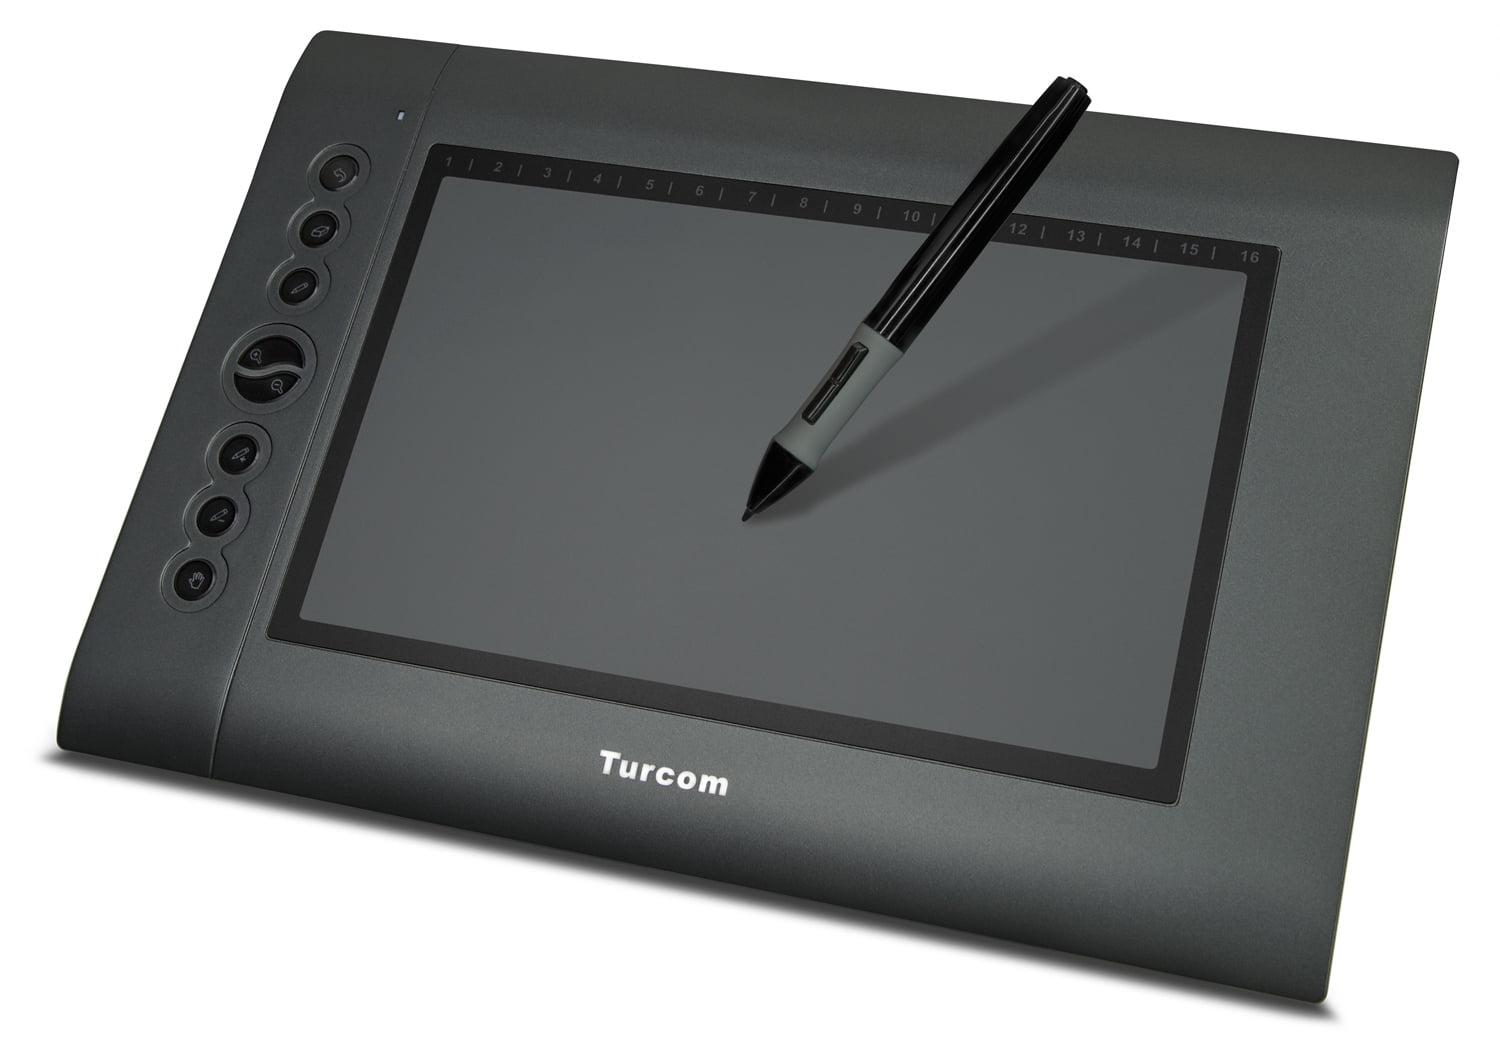 Turcom Graphic Tablet Drawing Tablets and Pen/Stylus for PC Mac